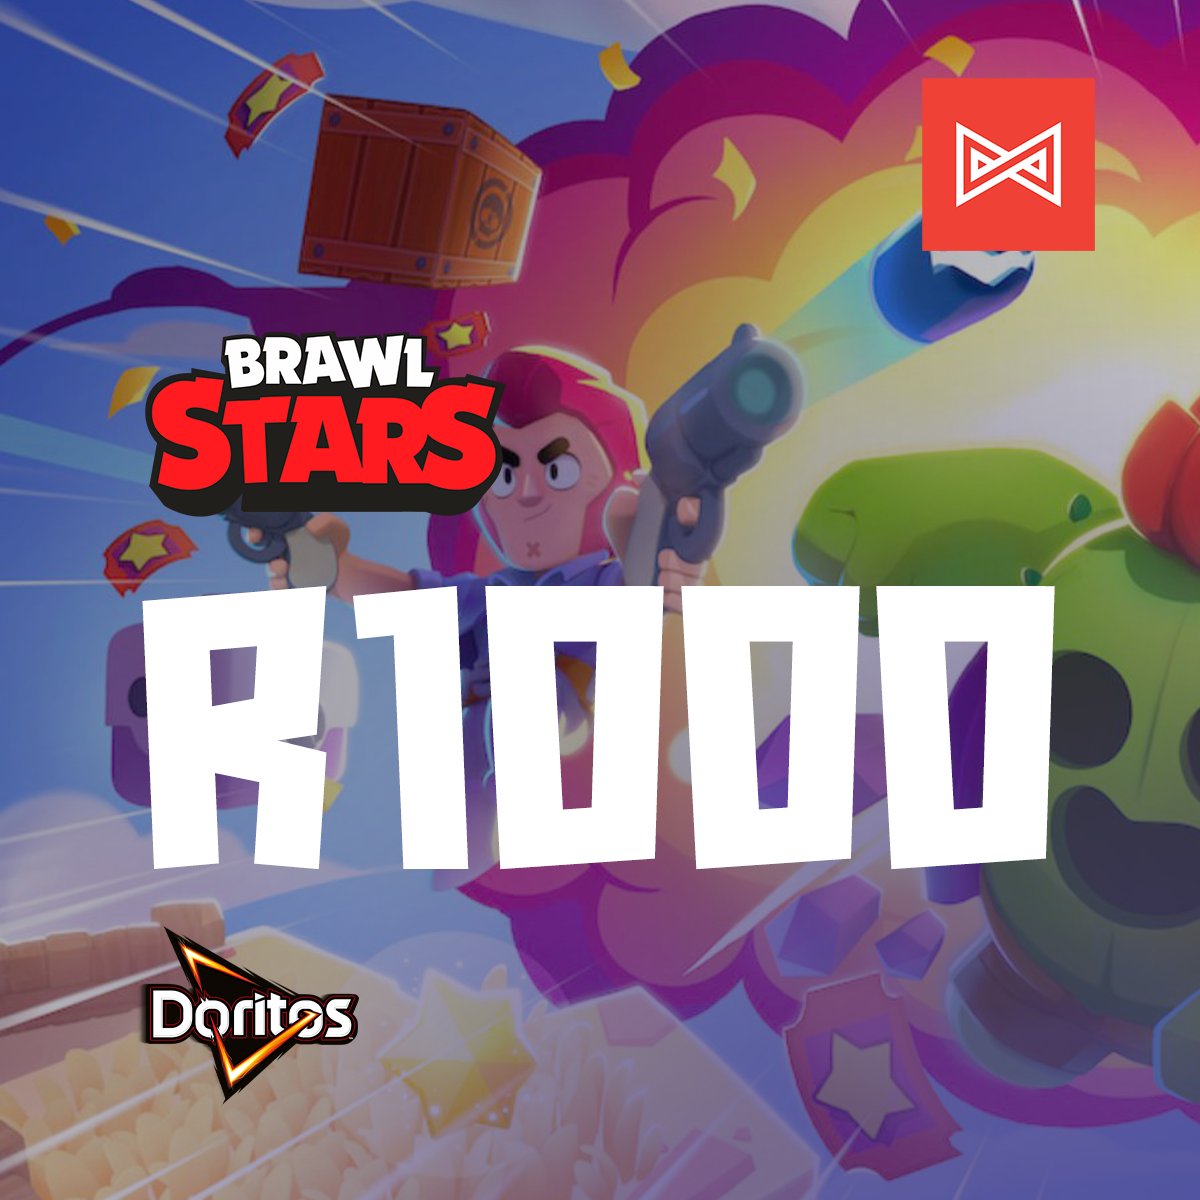 Get ready for today's #BrawlStars casual cup!🌵🏆 Check-ins open at 18:30CAT sharp over on our Discord discord.gg/mettlestate!🕡🎮 Sign up here before closure at 18:00CAT👉 tinyurl.com/3nz5xd6w Brought to you by @DoritosSA  #ForgeGaming #CasualCups